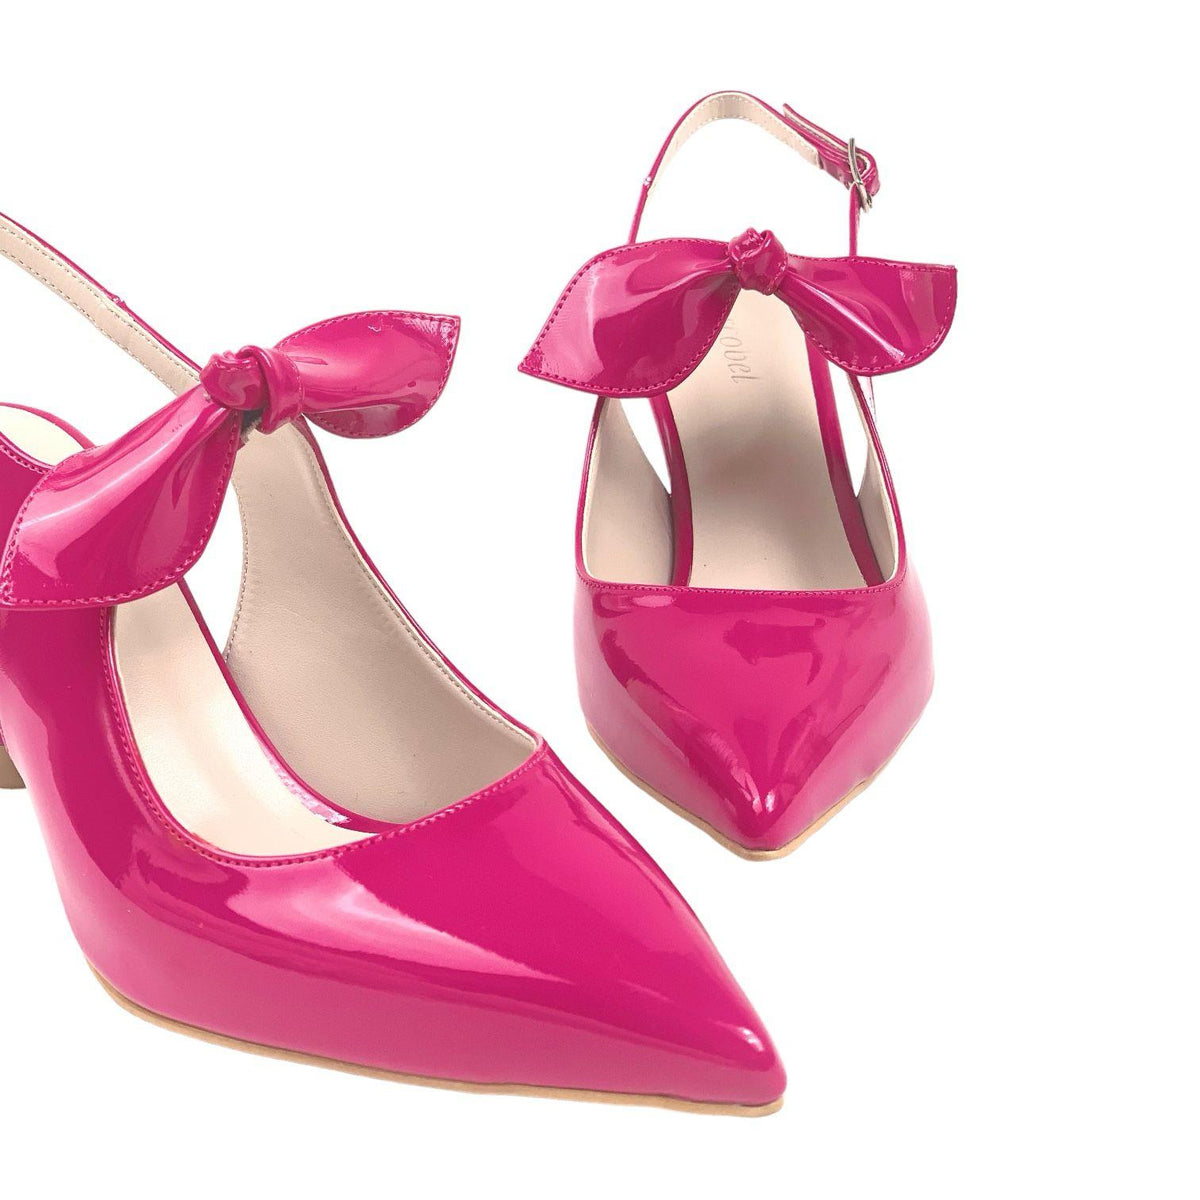 Women's Fuchsia Patent Leather Material Tanb Bow Detailed Heeled Pointed Toe Shoes 7 cm Heel - STREETMODE™